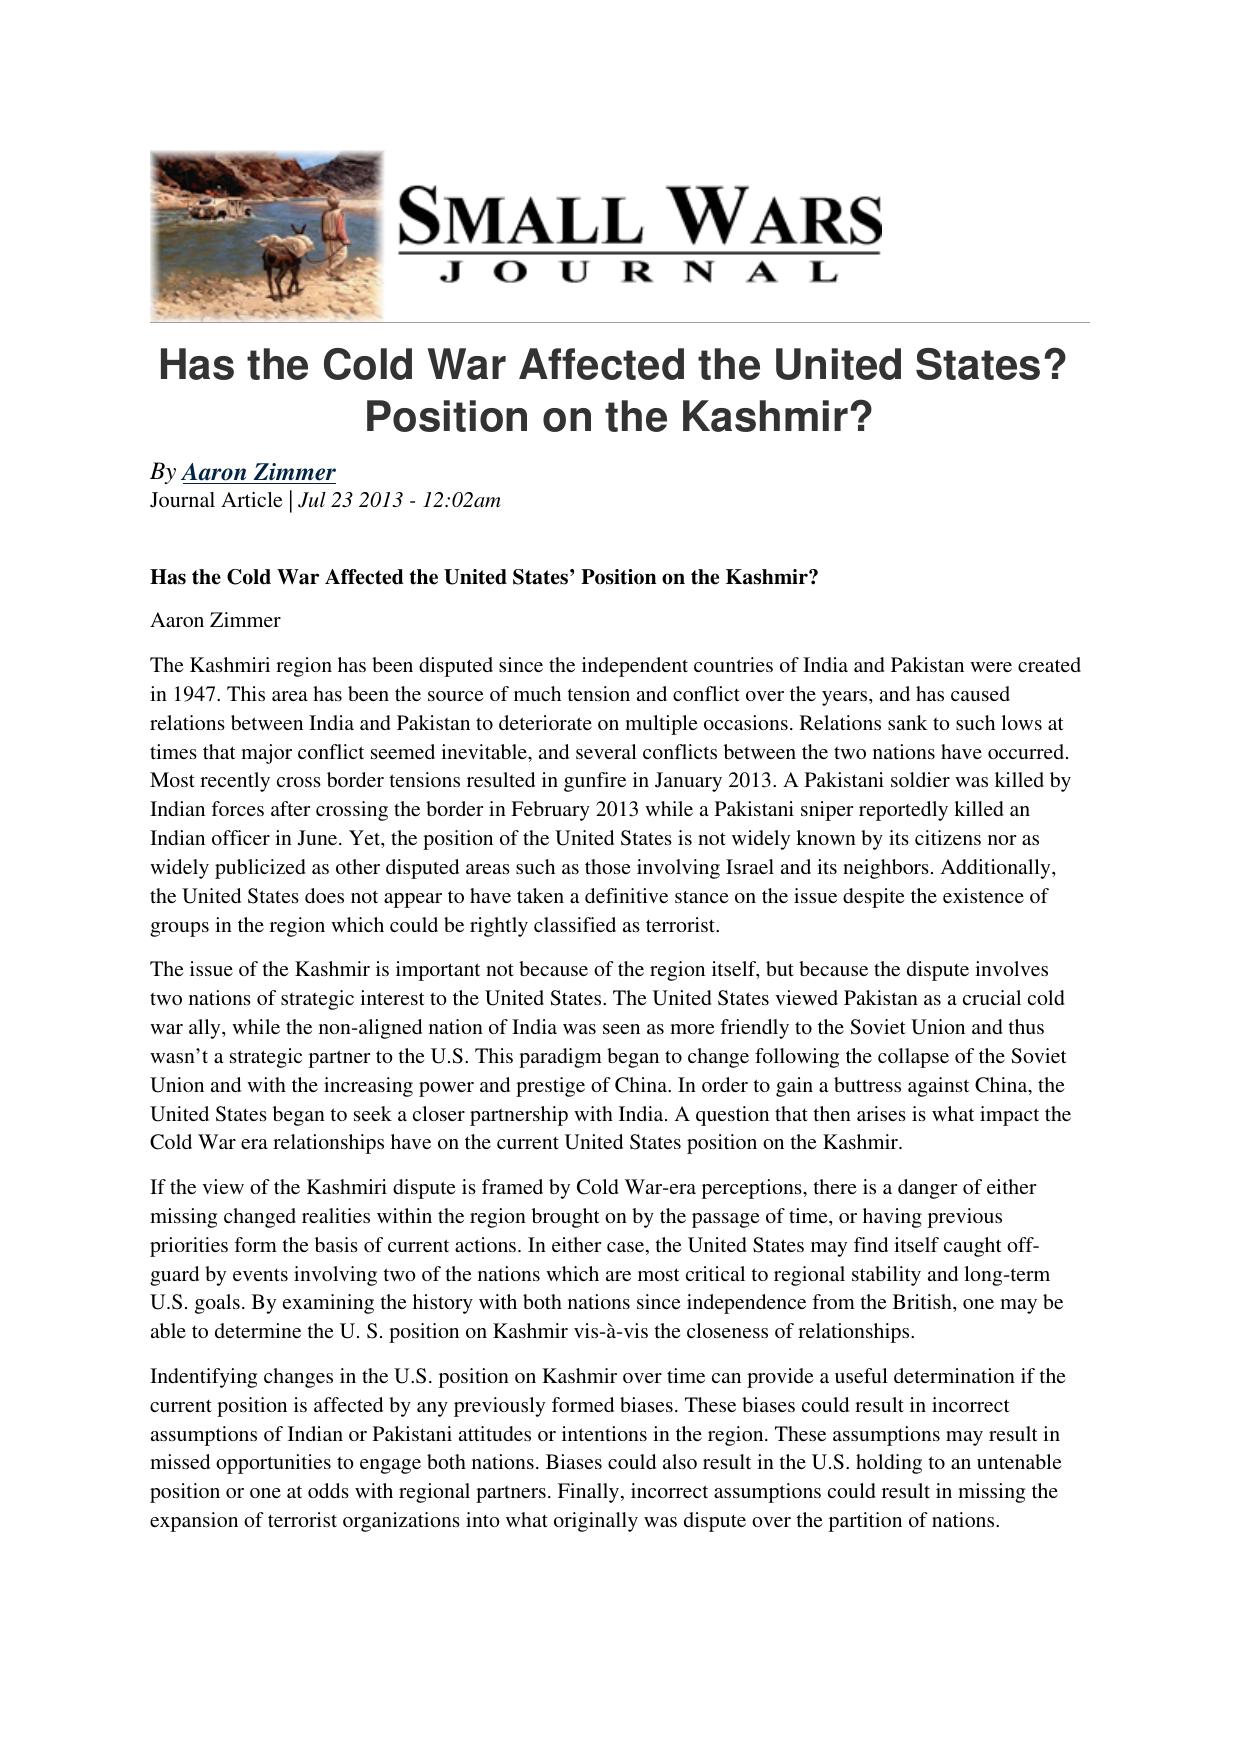 Has the Cold War Affected the United States? Position on the Kashmir?